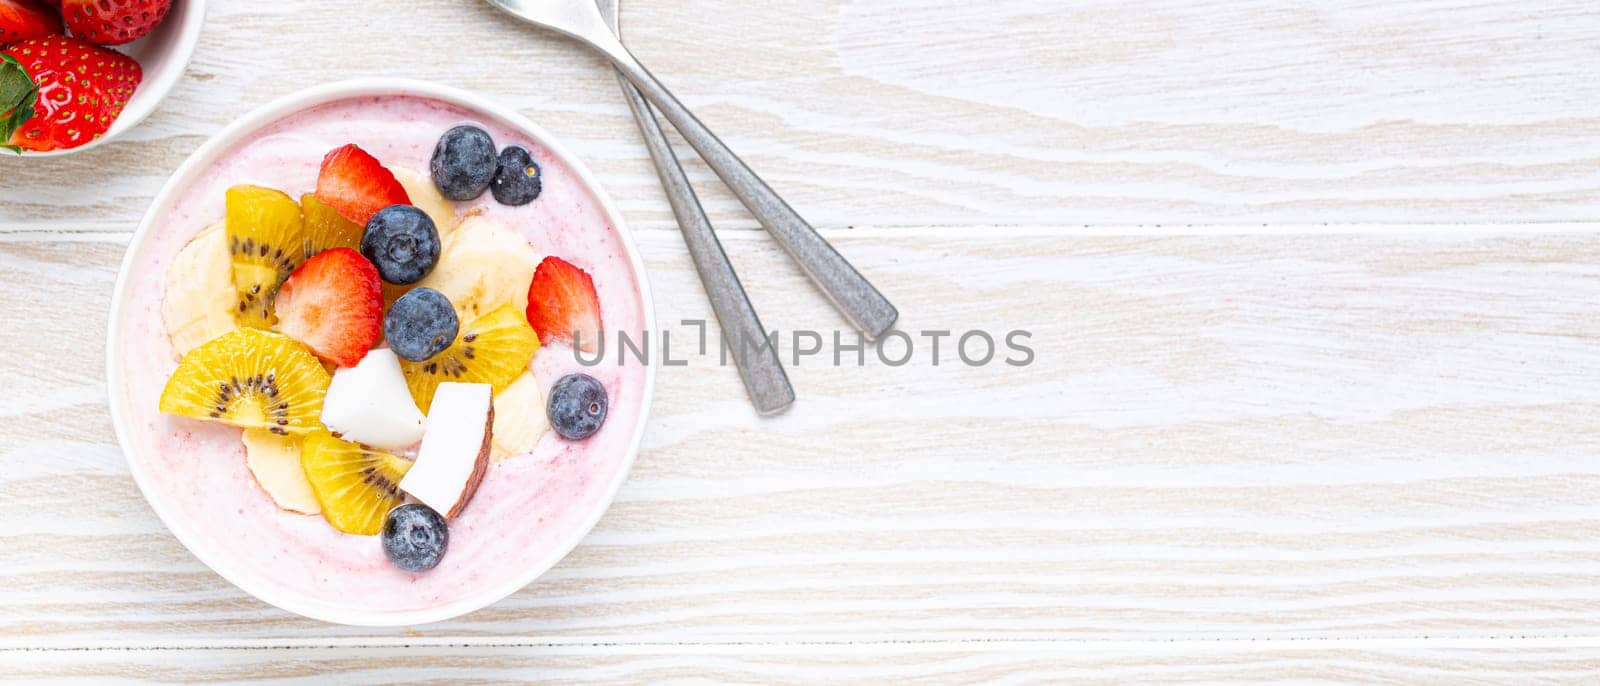 Healthy breakfast or dessert yogurt bowl with fresh banana, strawberry, blueberry, cocos, kiwi top view on rustic wooden white background with spoon. Space for text